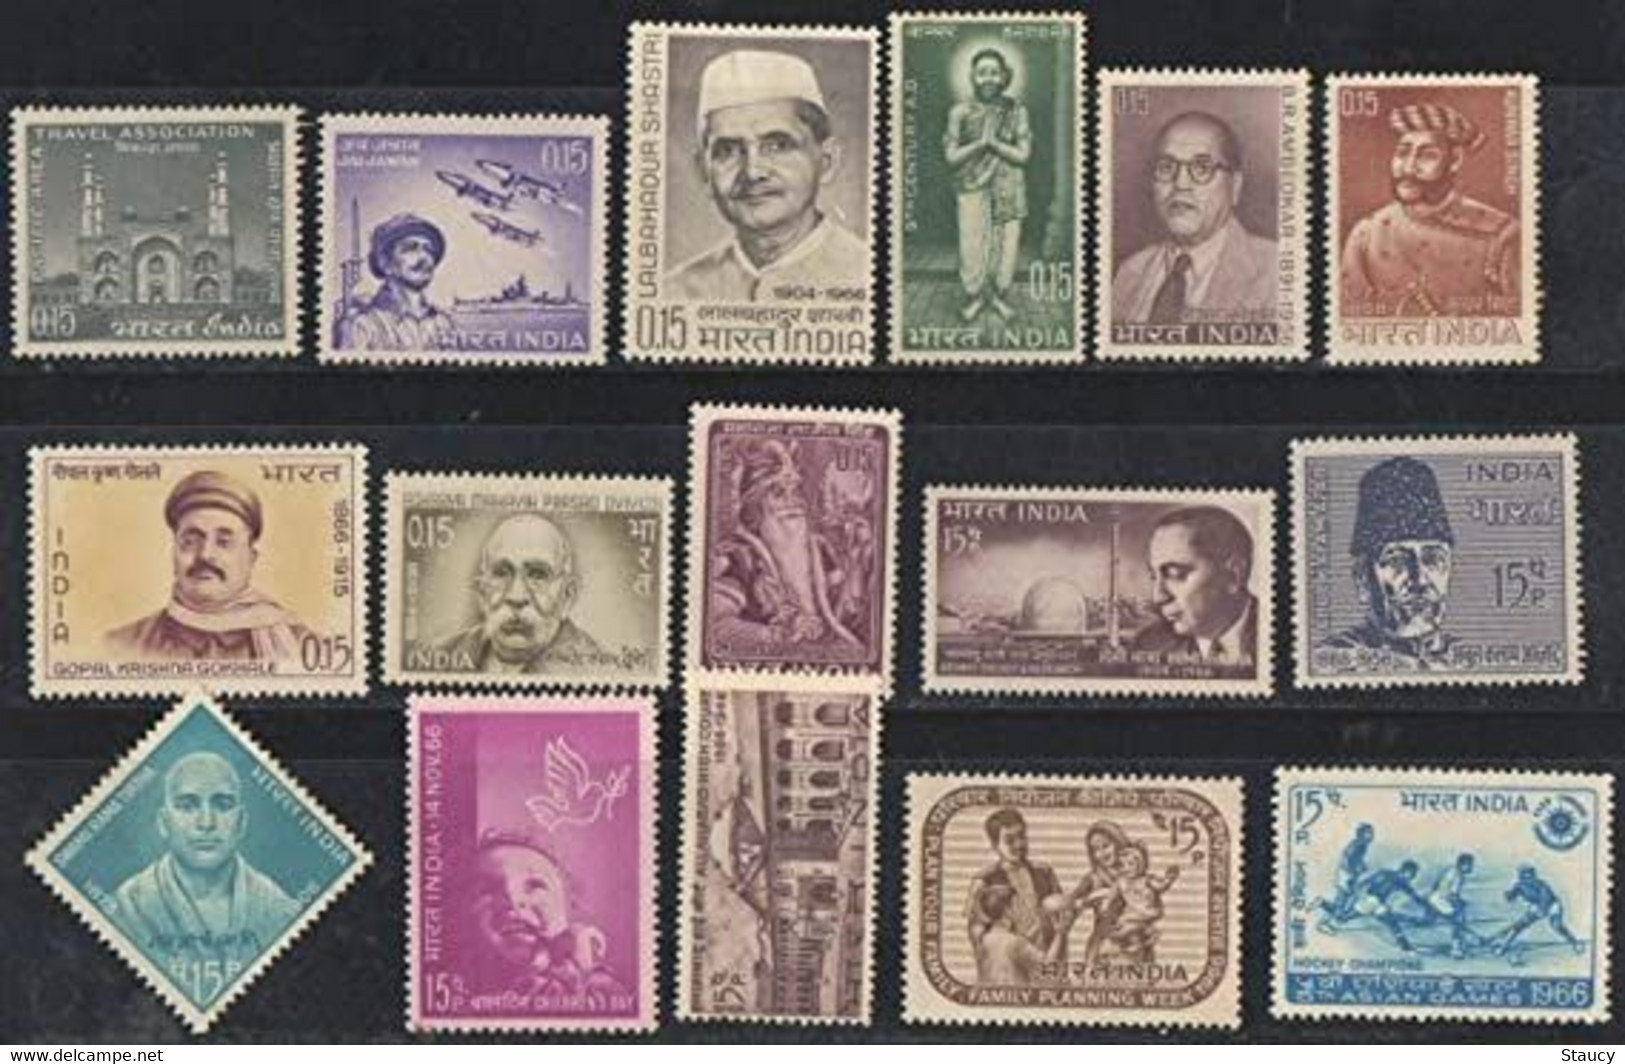 India 1966 Complete Year Pack / Set / Collection Total 16 Stamps (No Missing) MNH As Per Scan - Annate Complete